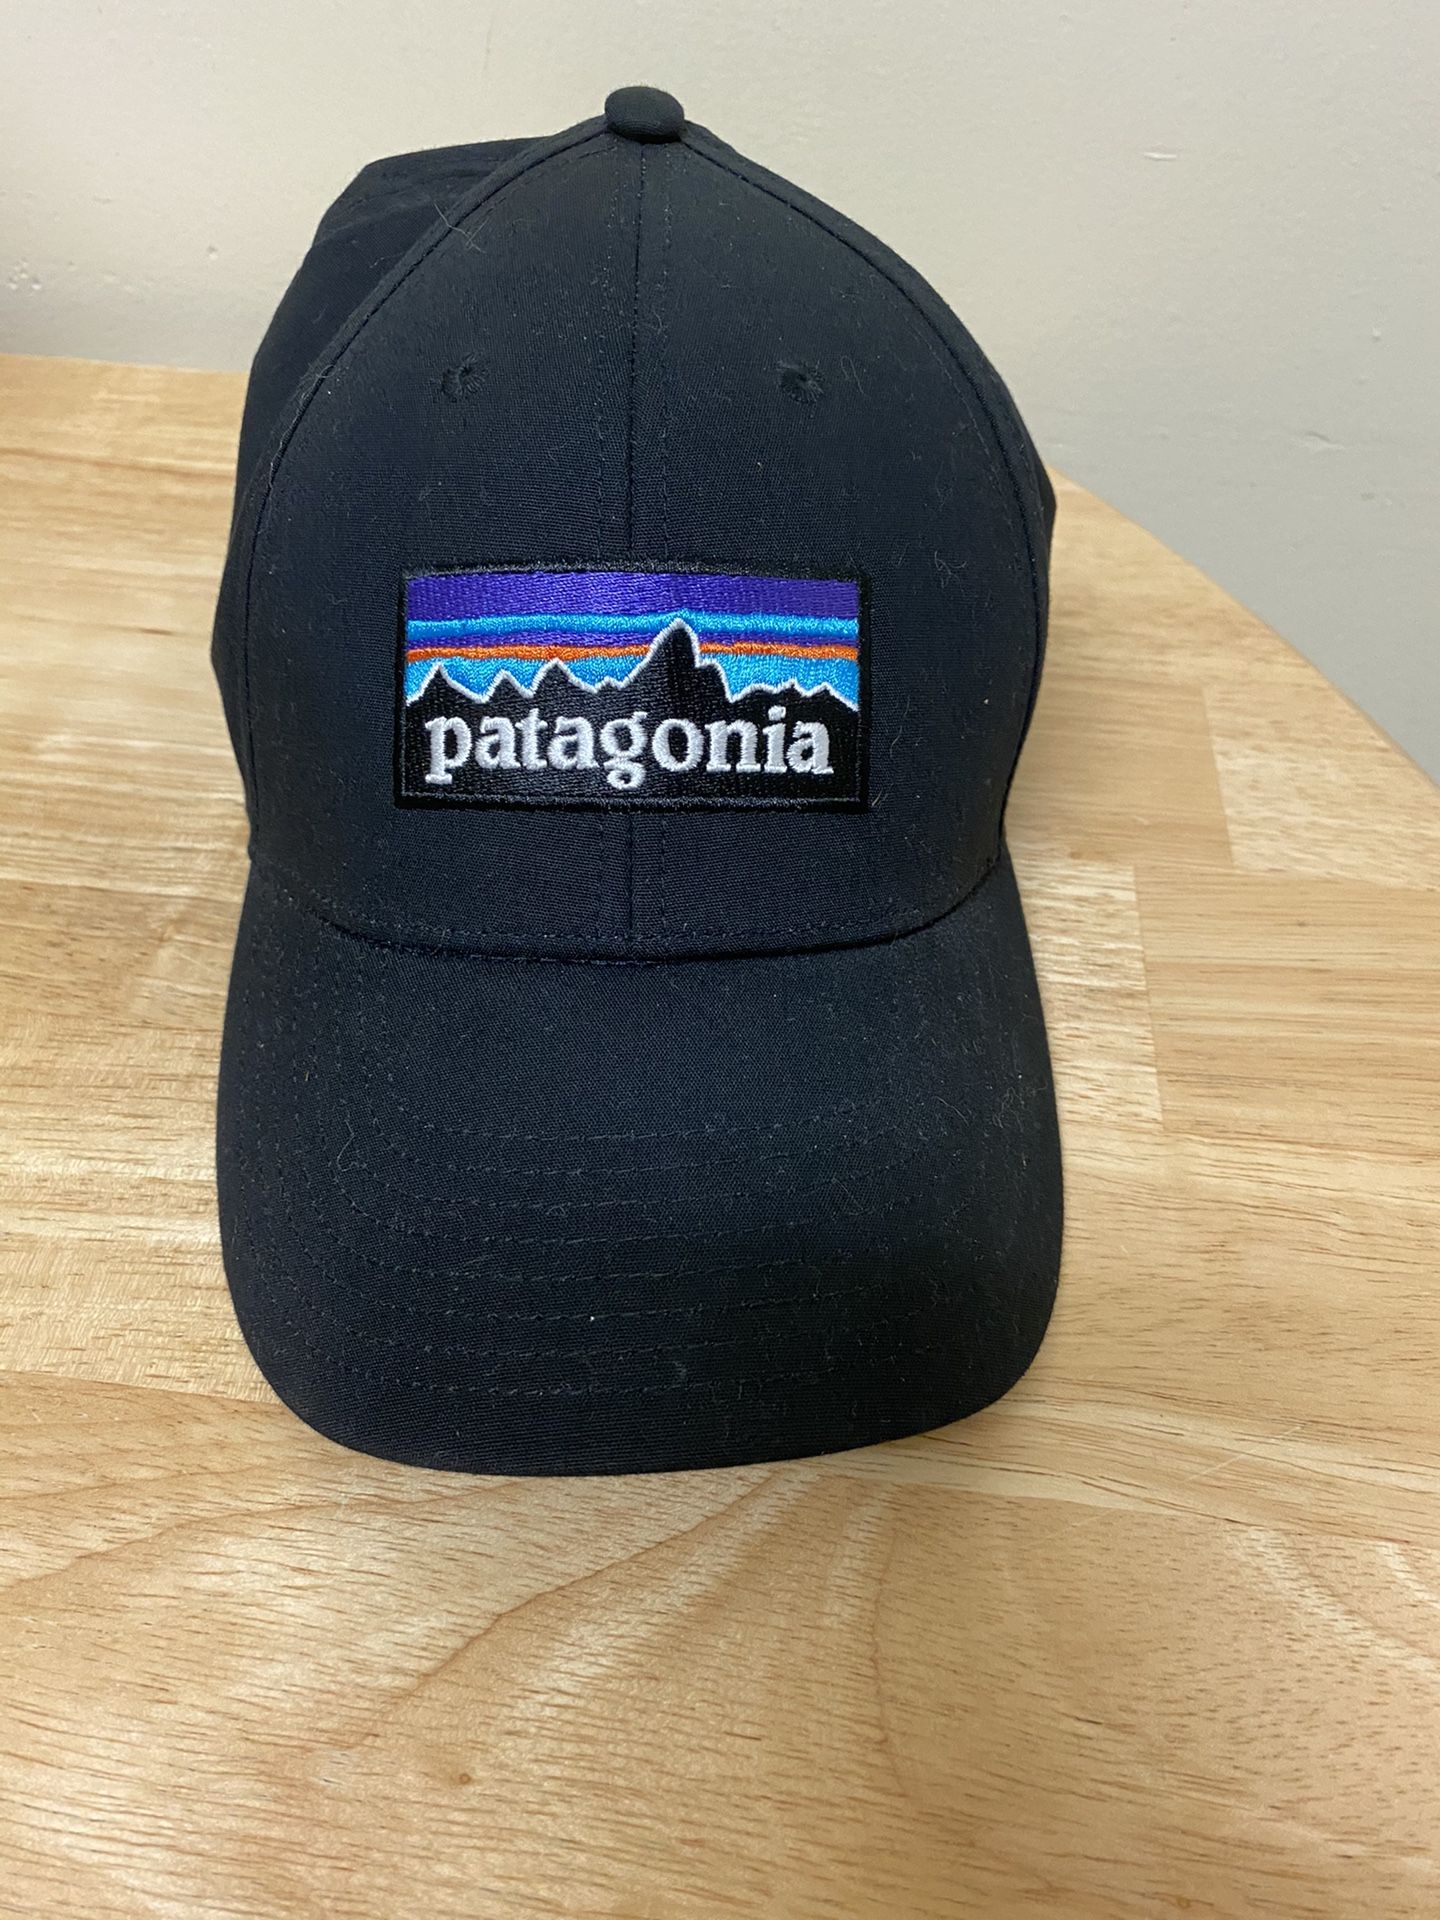 Patagonia hat.. message for price